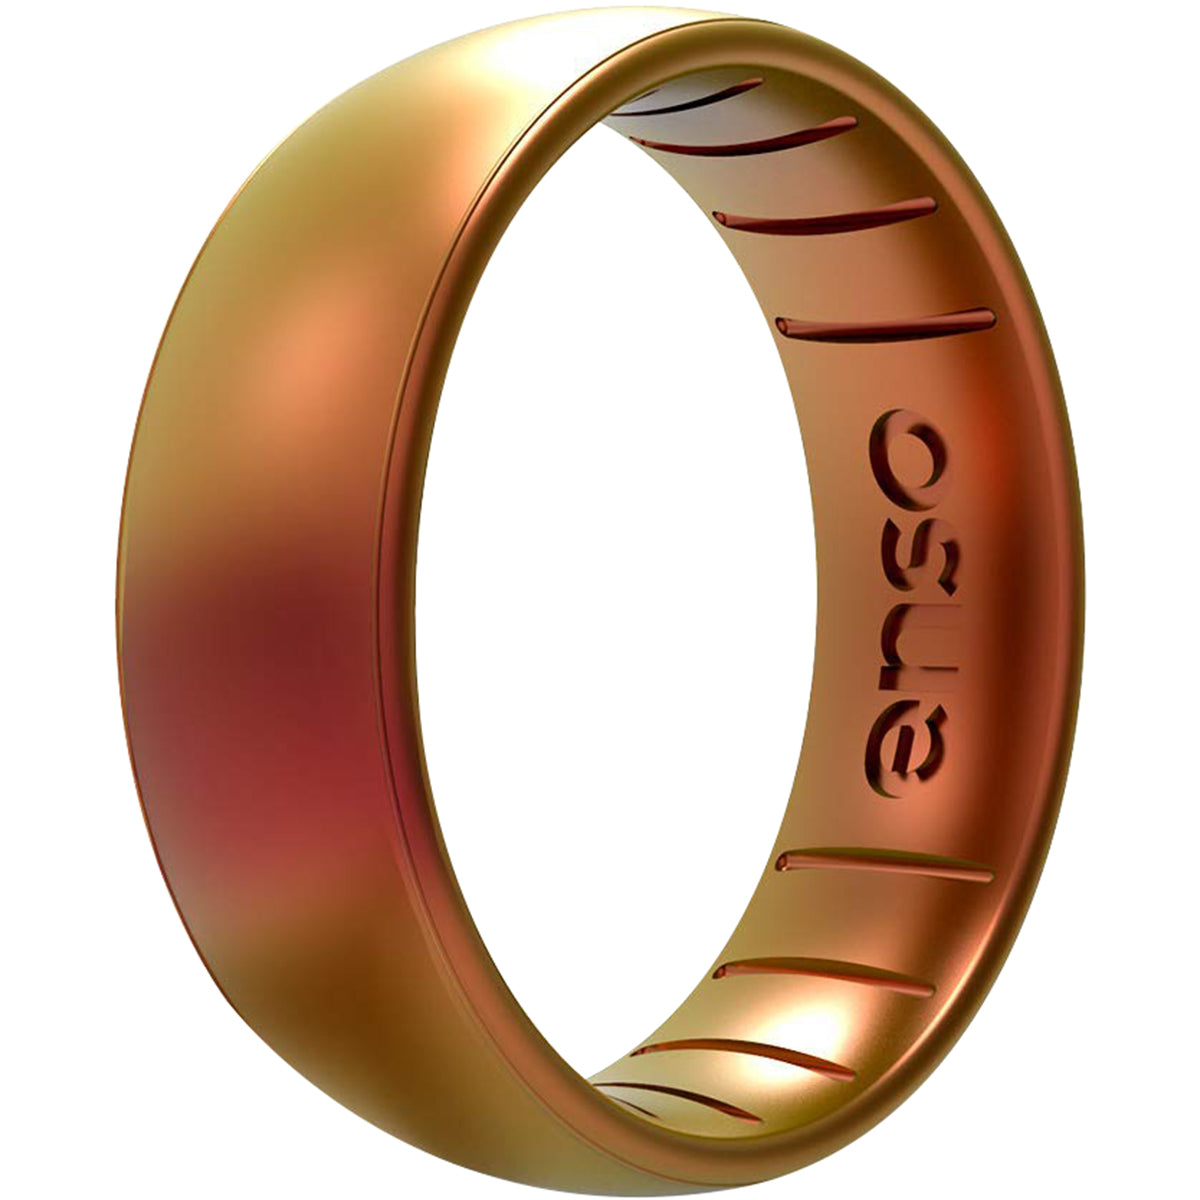 Enso Rings Classic Legends Series Silicone Ring - Poseidon Enso Rings